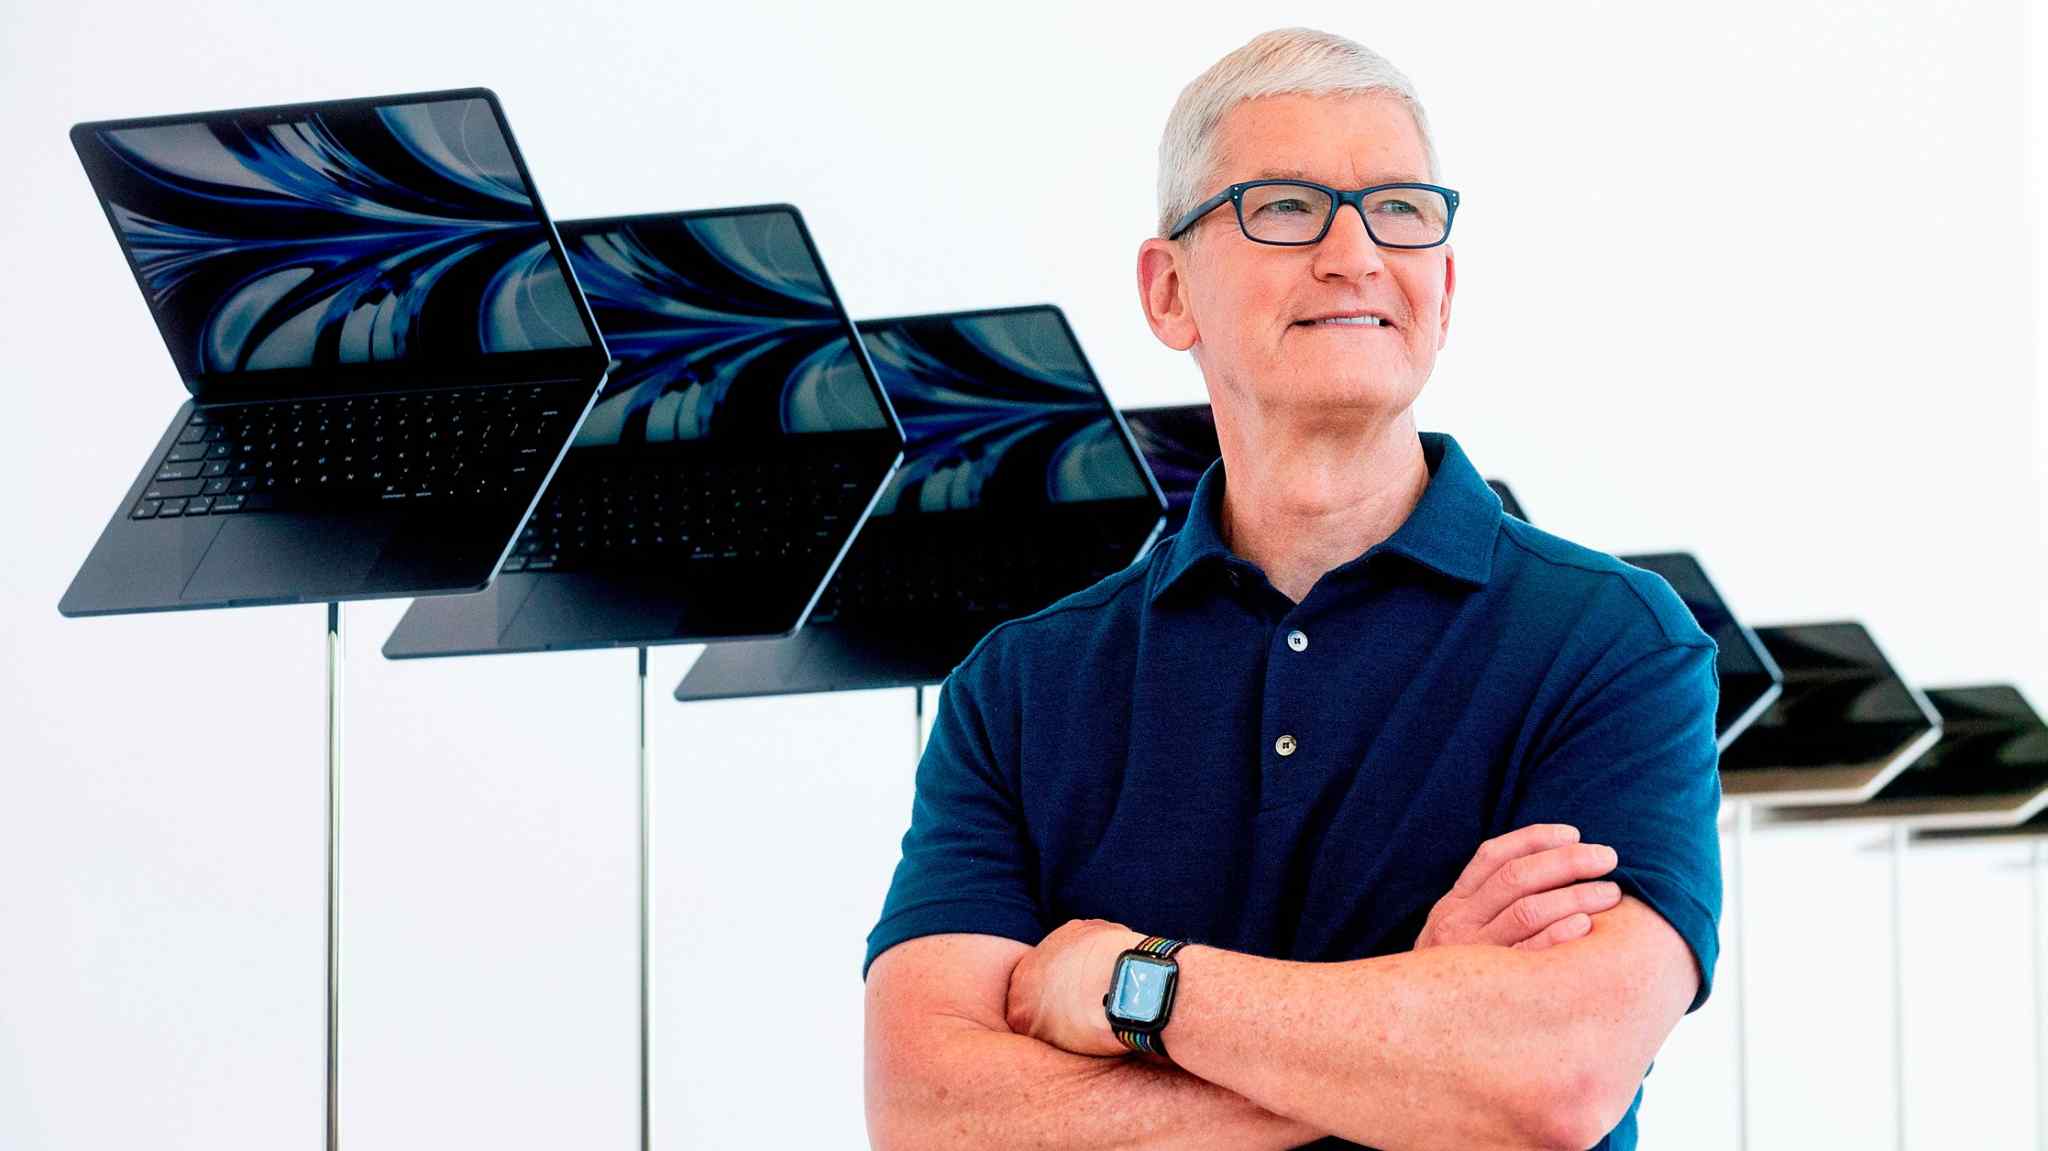 Tim Cook charm resolves Twitter spat yet China crisis rumbles on